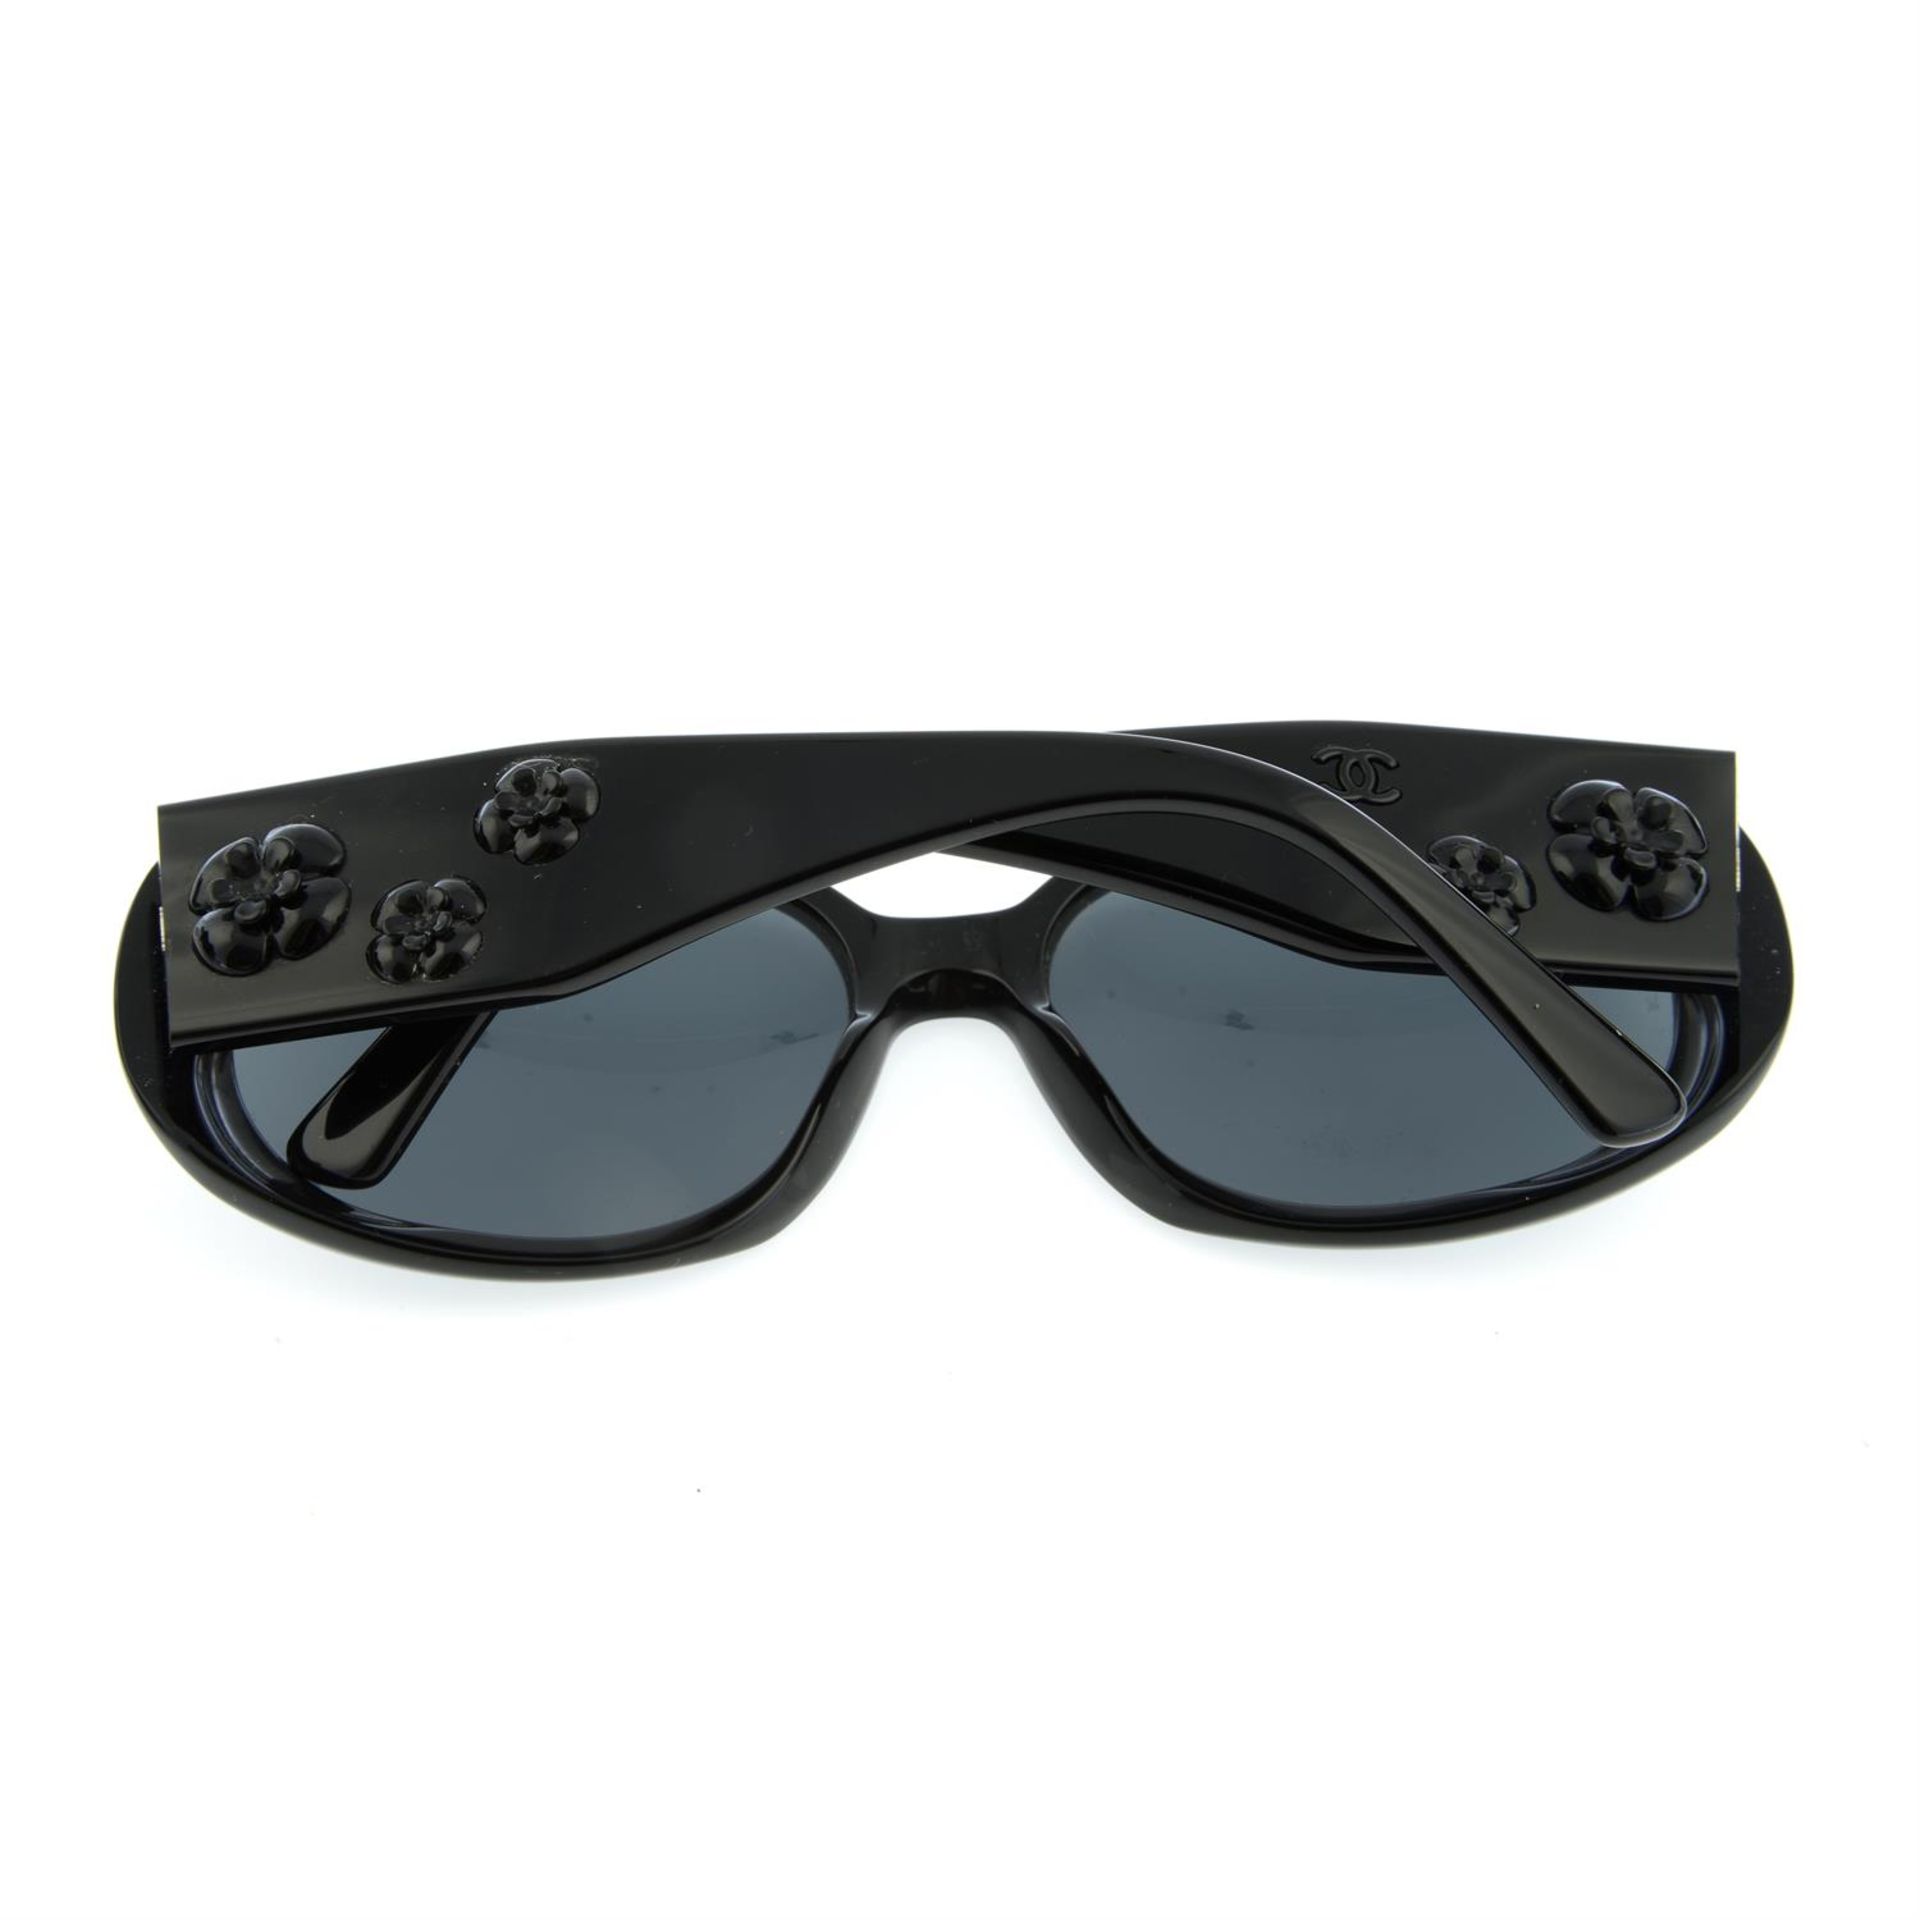 CHANEL - a pair of sunglasses. - Image 2 of 3